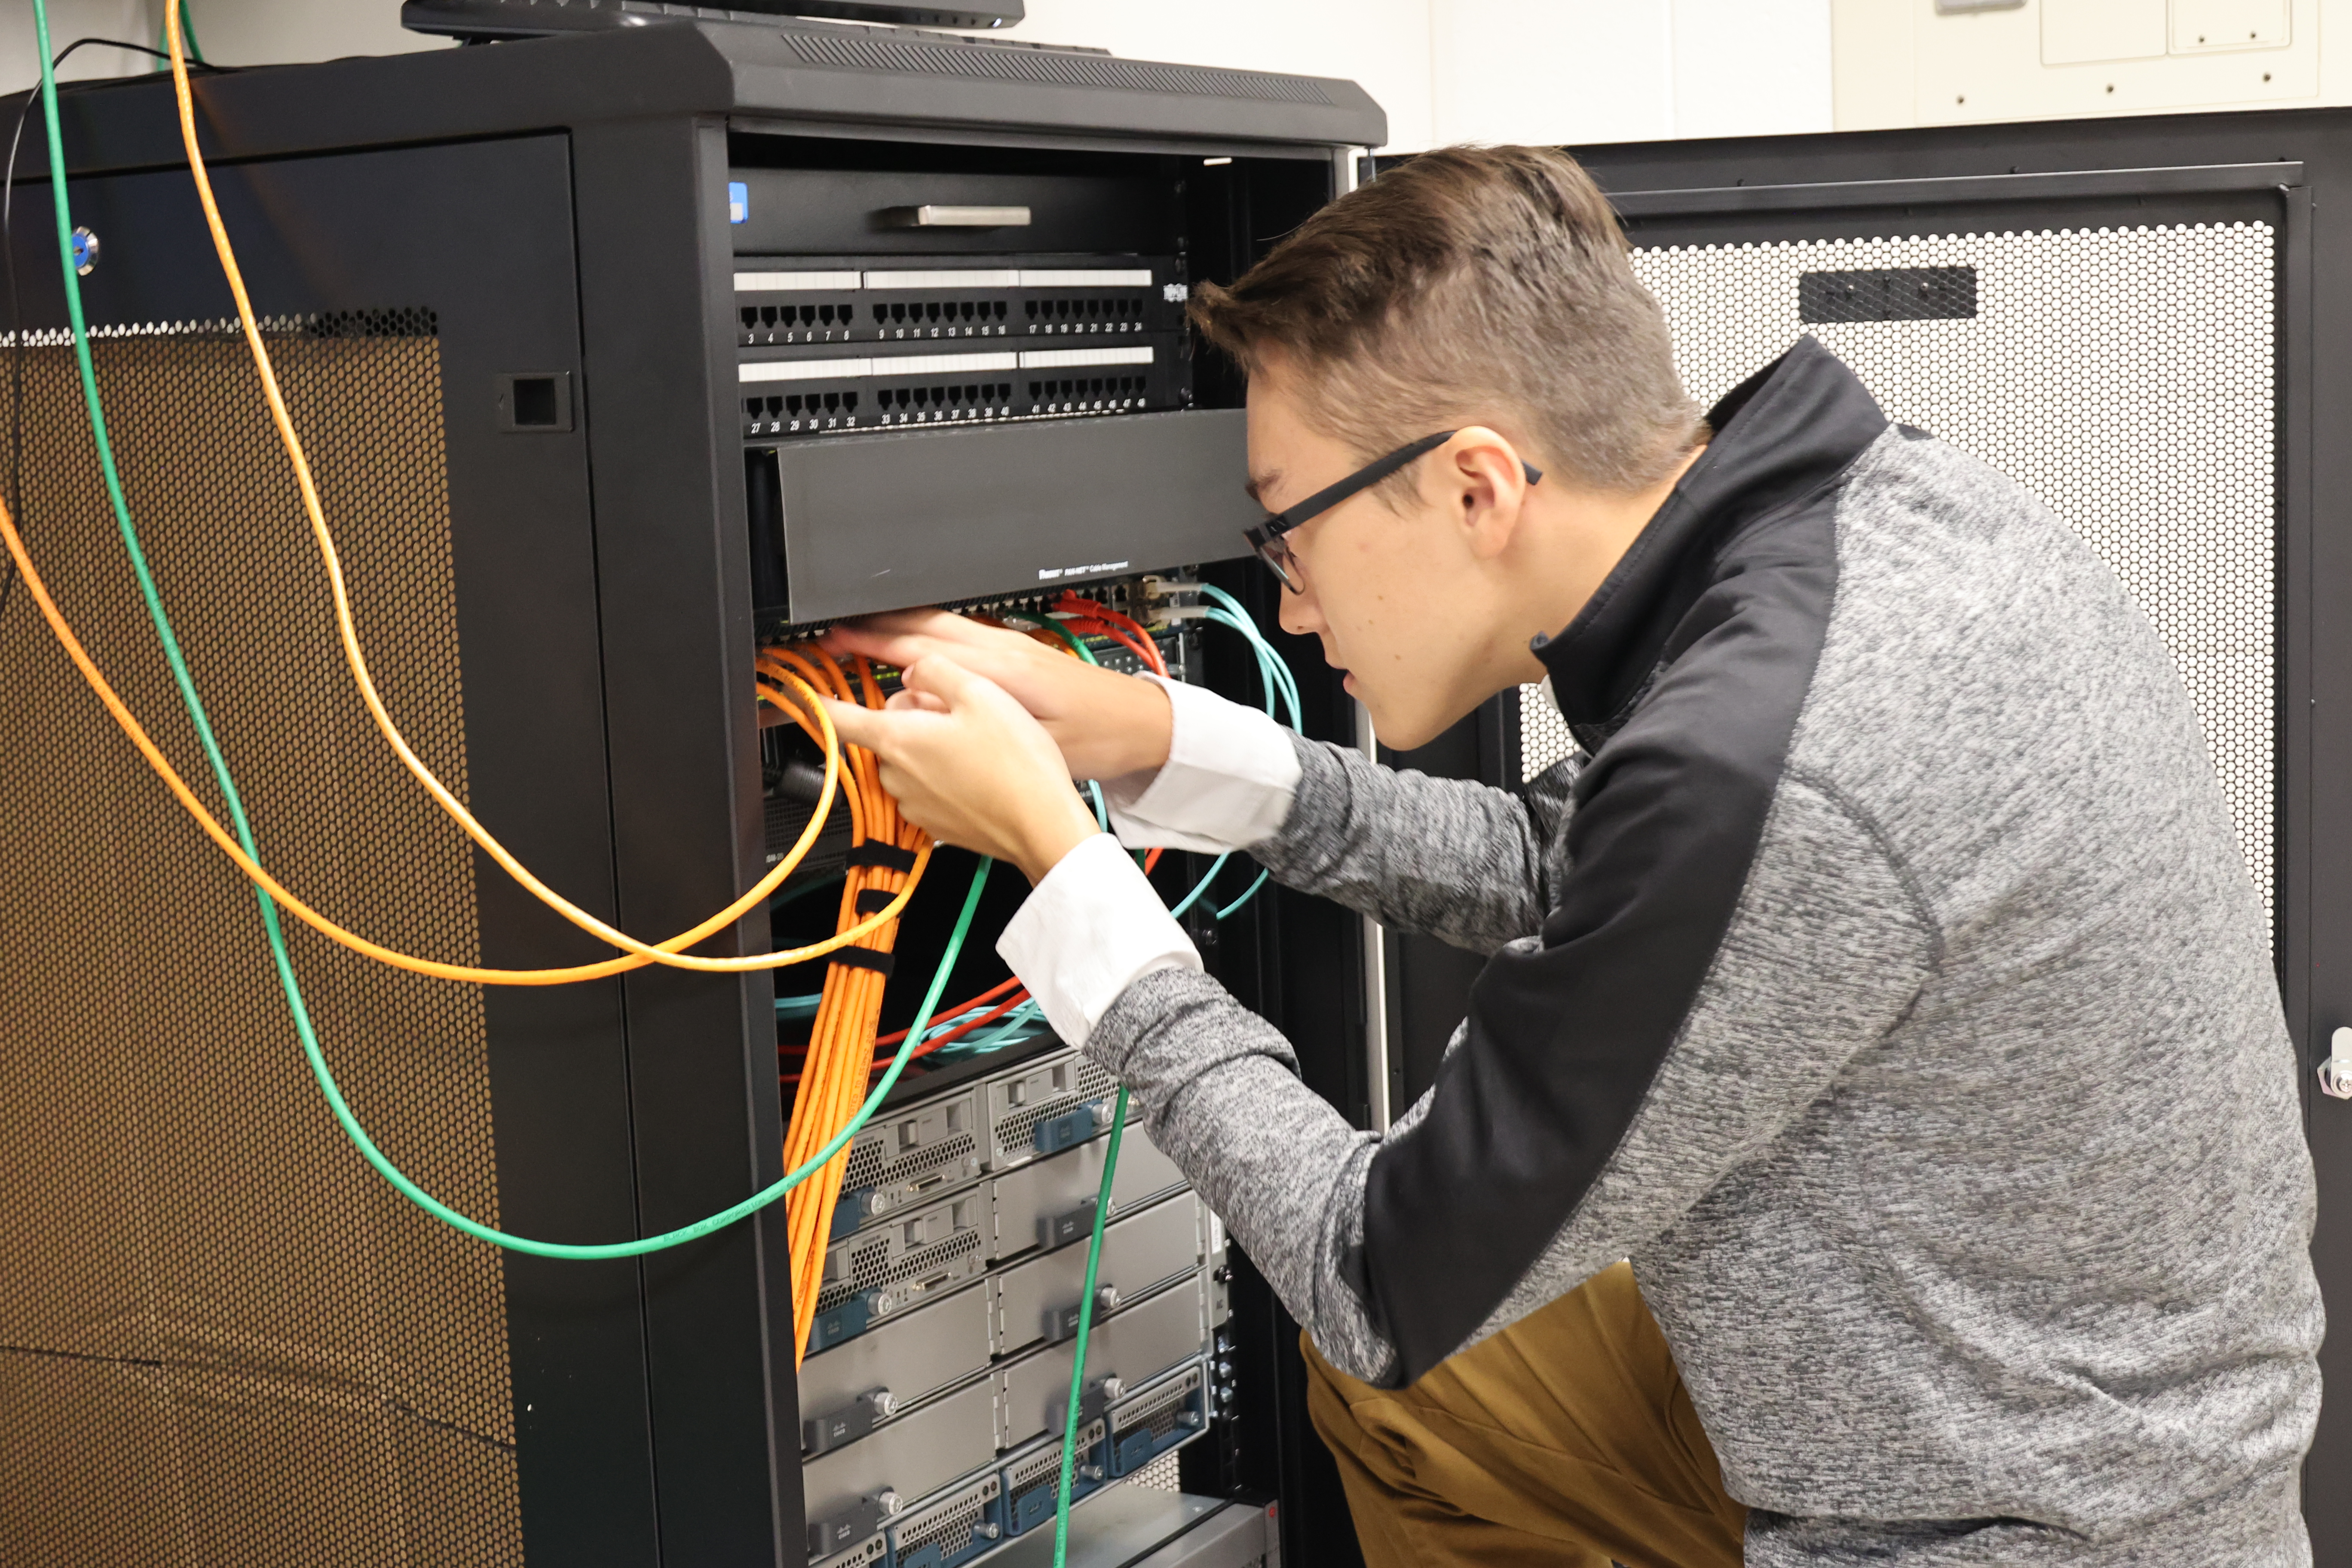 A male student is separating networking cords in its housing unit.